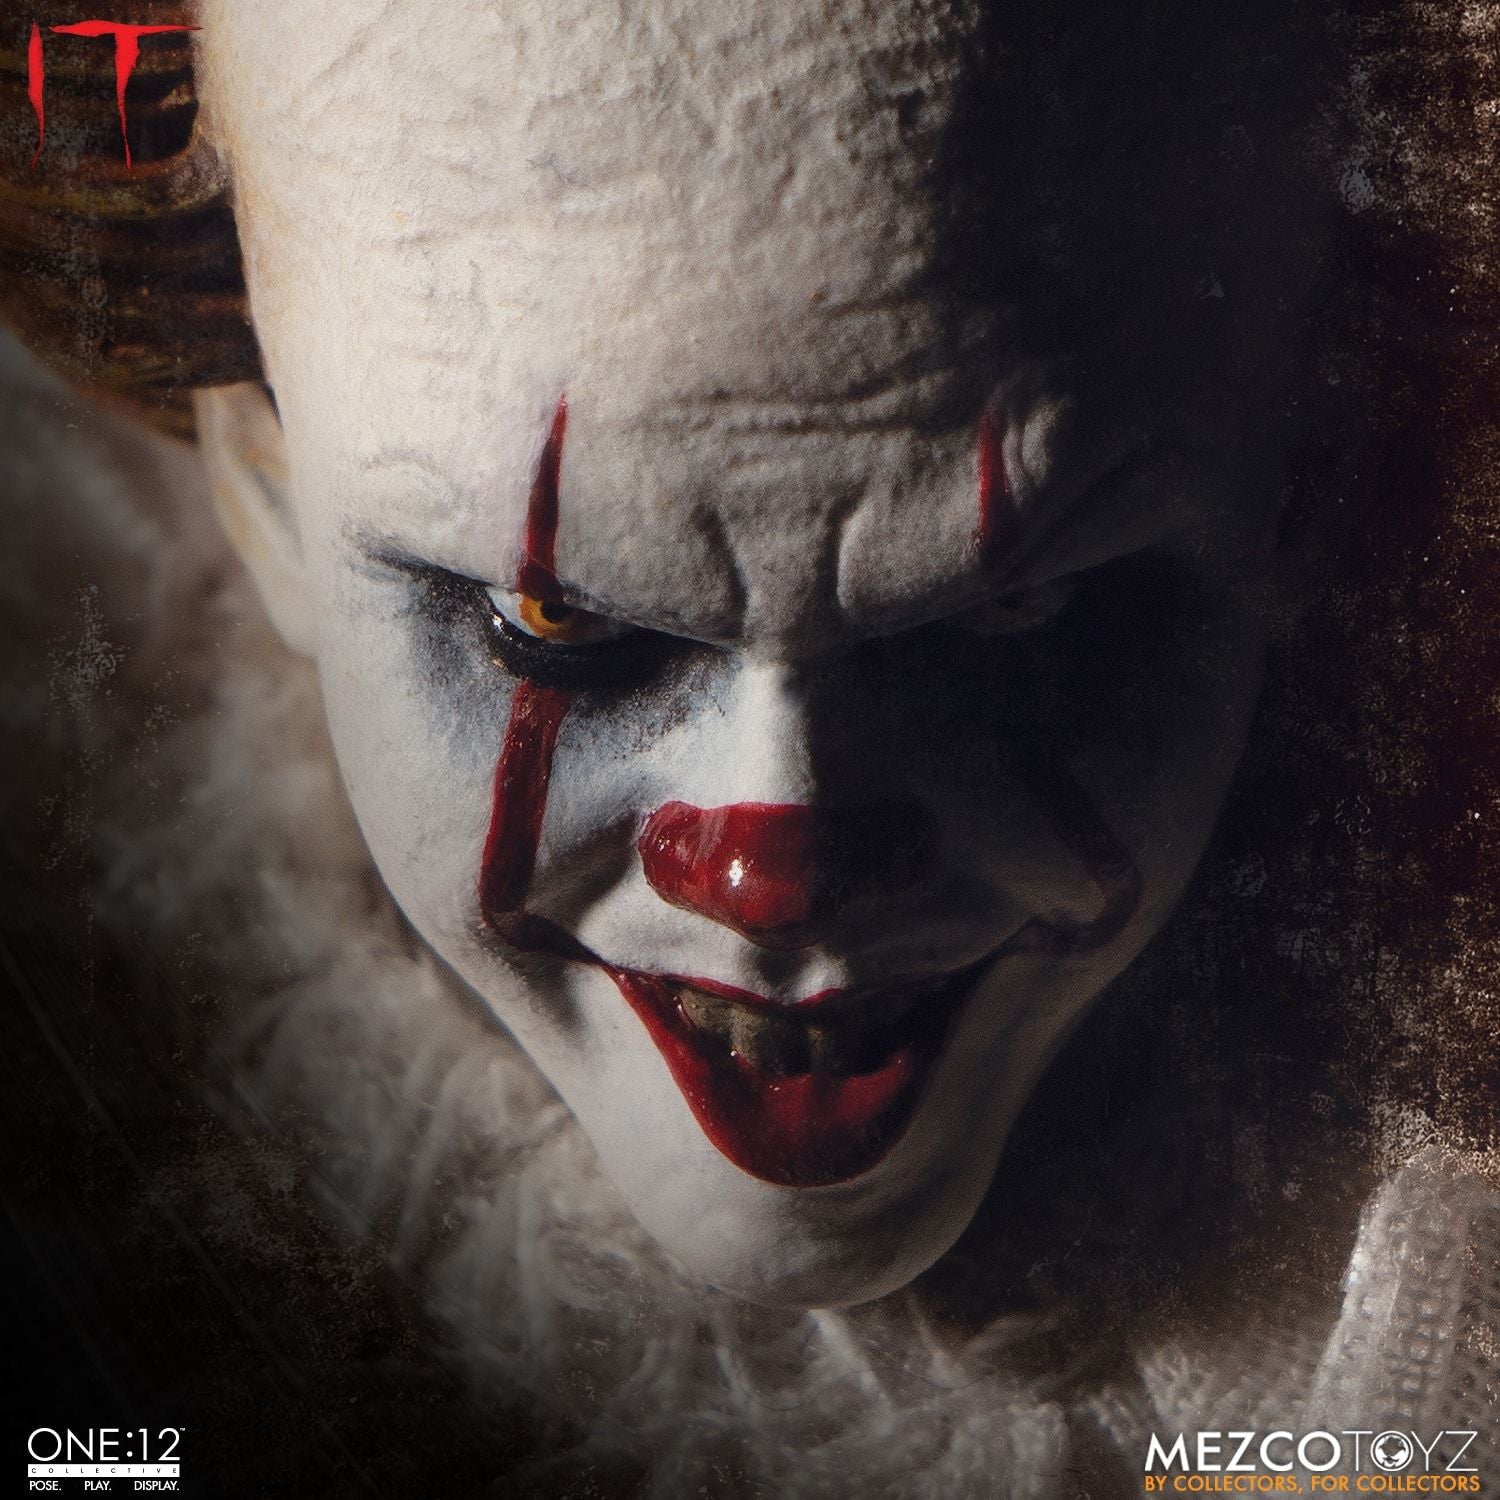 Mezco - One:12 Collective - IT (2017) - Pennywise - Marvelous Toys